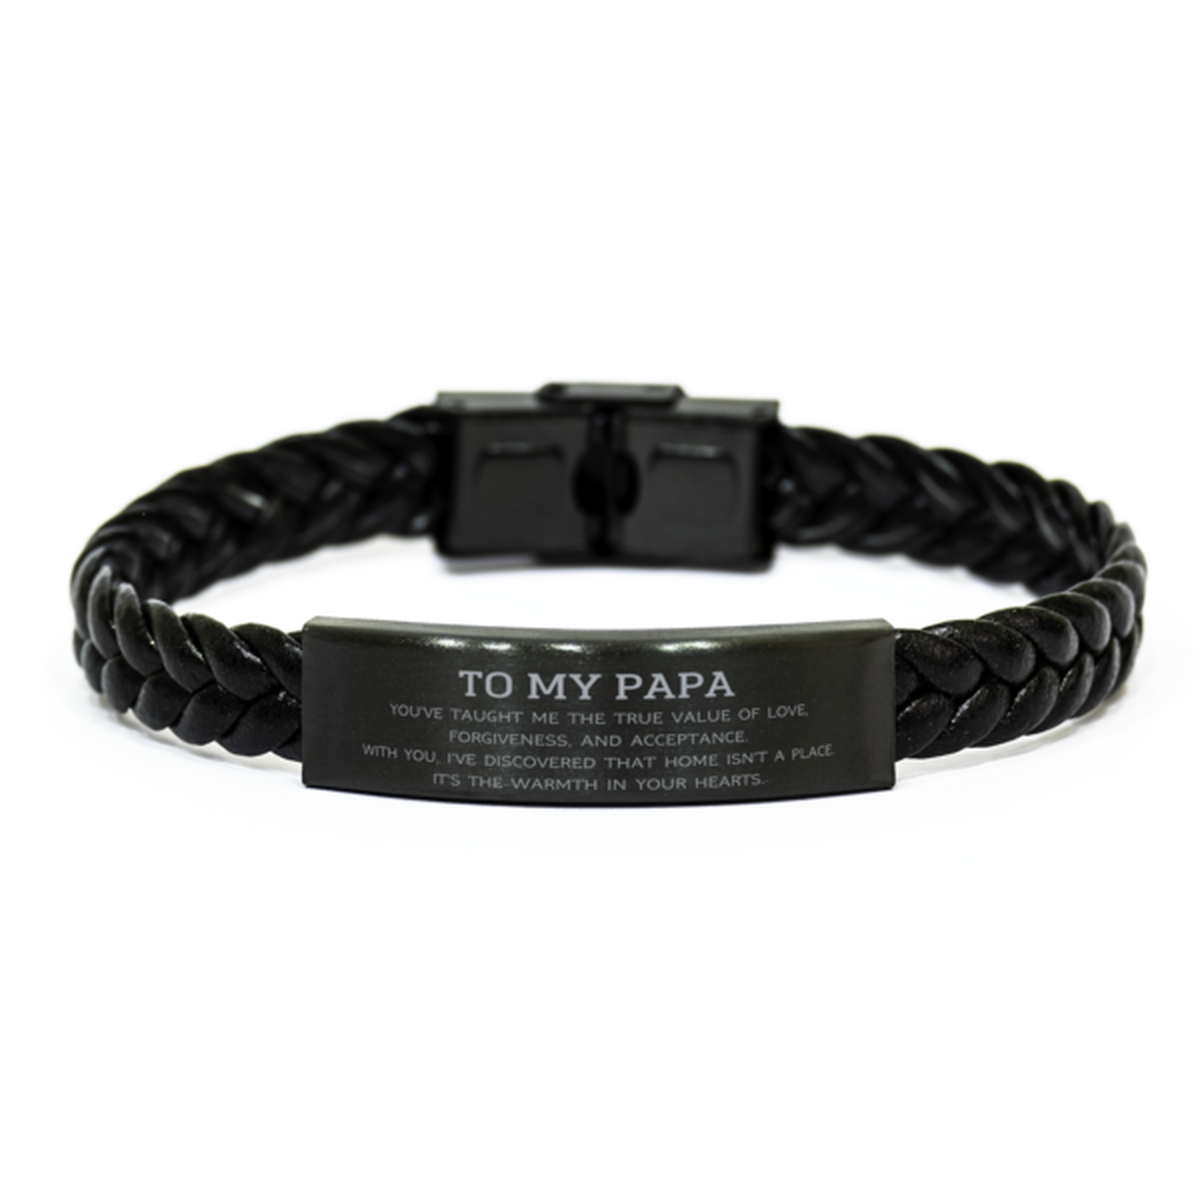 To My Papa Gifts, You've taught me the true value of love, Thank You Gifts For Papa, Birthday Braided Leather Bracelet For Papa